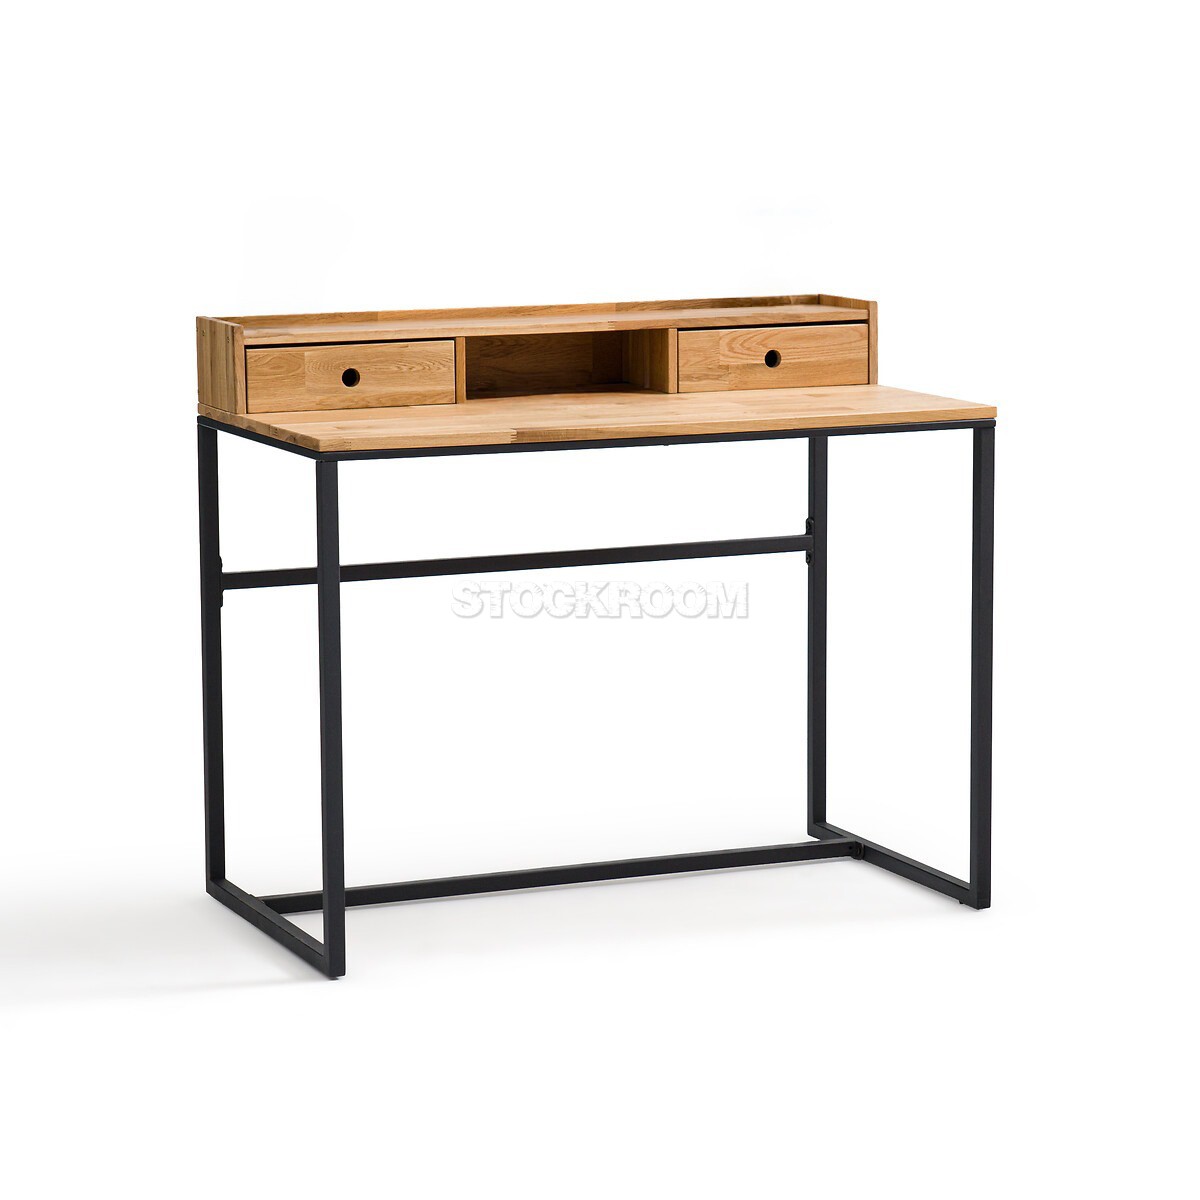 Bryson Study Desk With Drawers